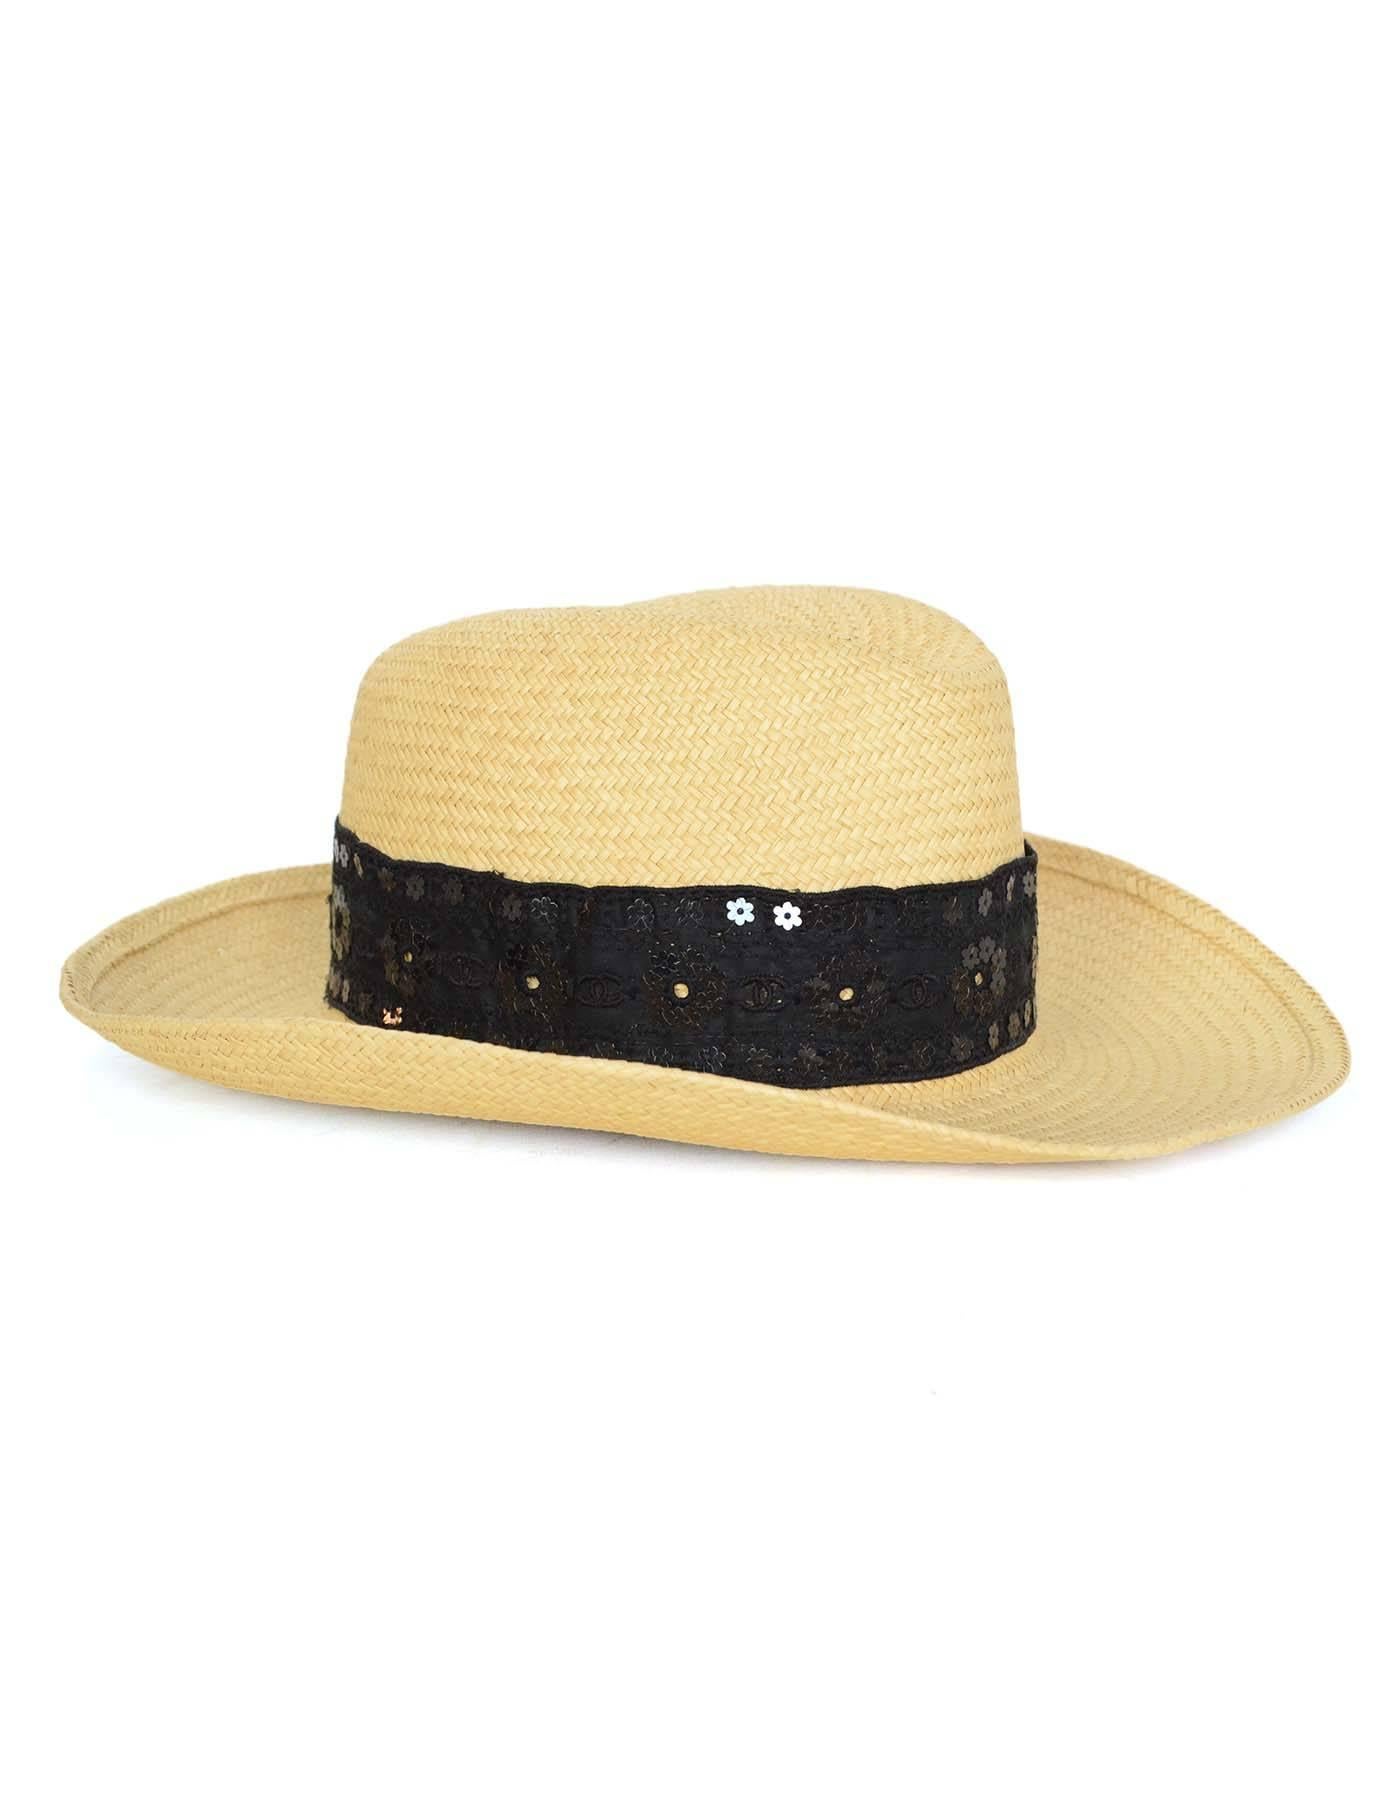 Chanel Natural Straw Panama Hat 
Features black eyelet & sequin ribbon detailing
Made In: France
Year of Production: 2006
Color: Neutral and black
Materials: 100% straw
Closure/Opening: None
Overall Condition: Excellent pre-owned